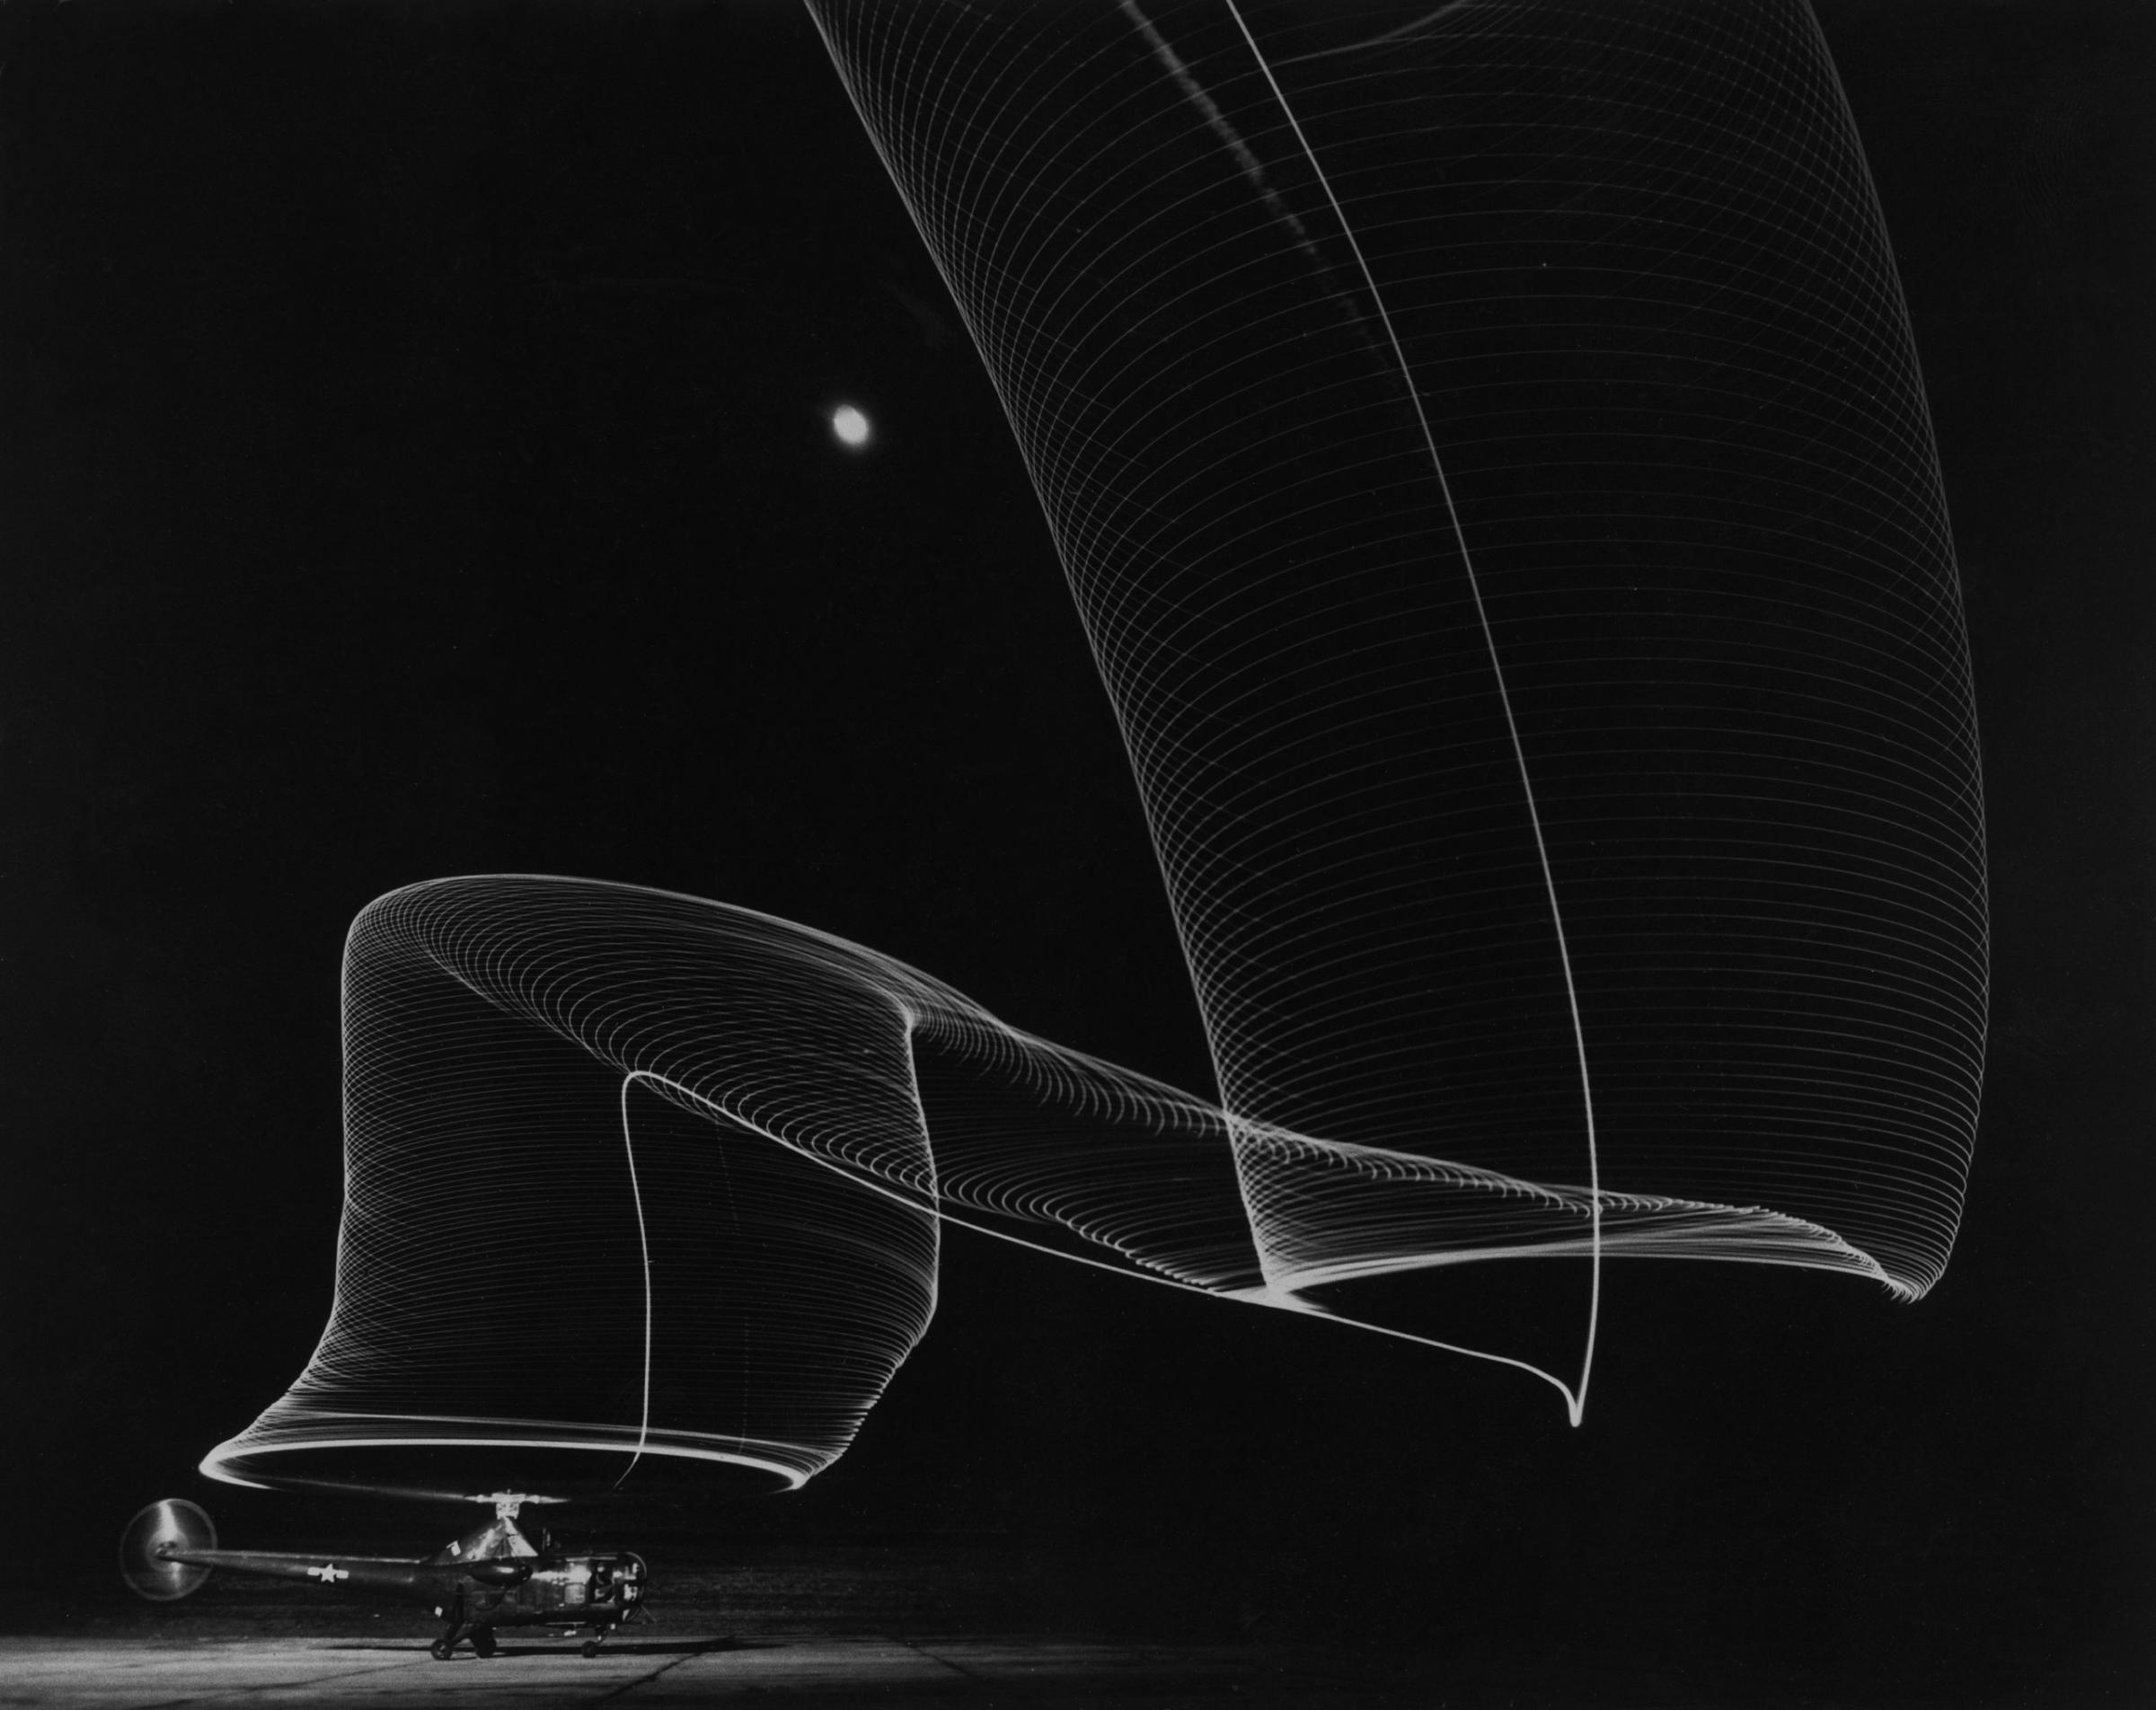 Slinky-like light pattern produced by light-tipped rotor blades of a helicopter as it takes off into the dark sky, 1949.